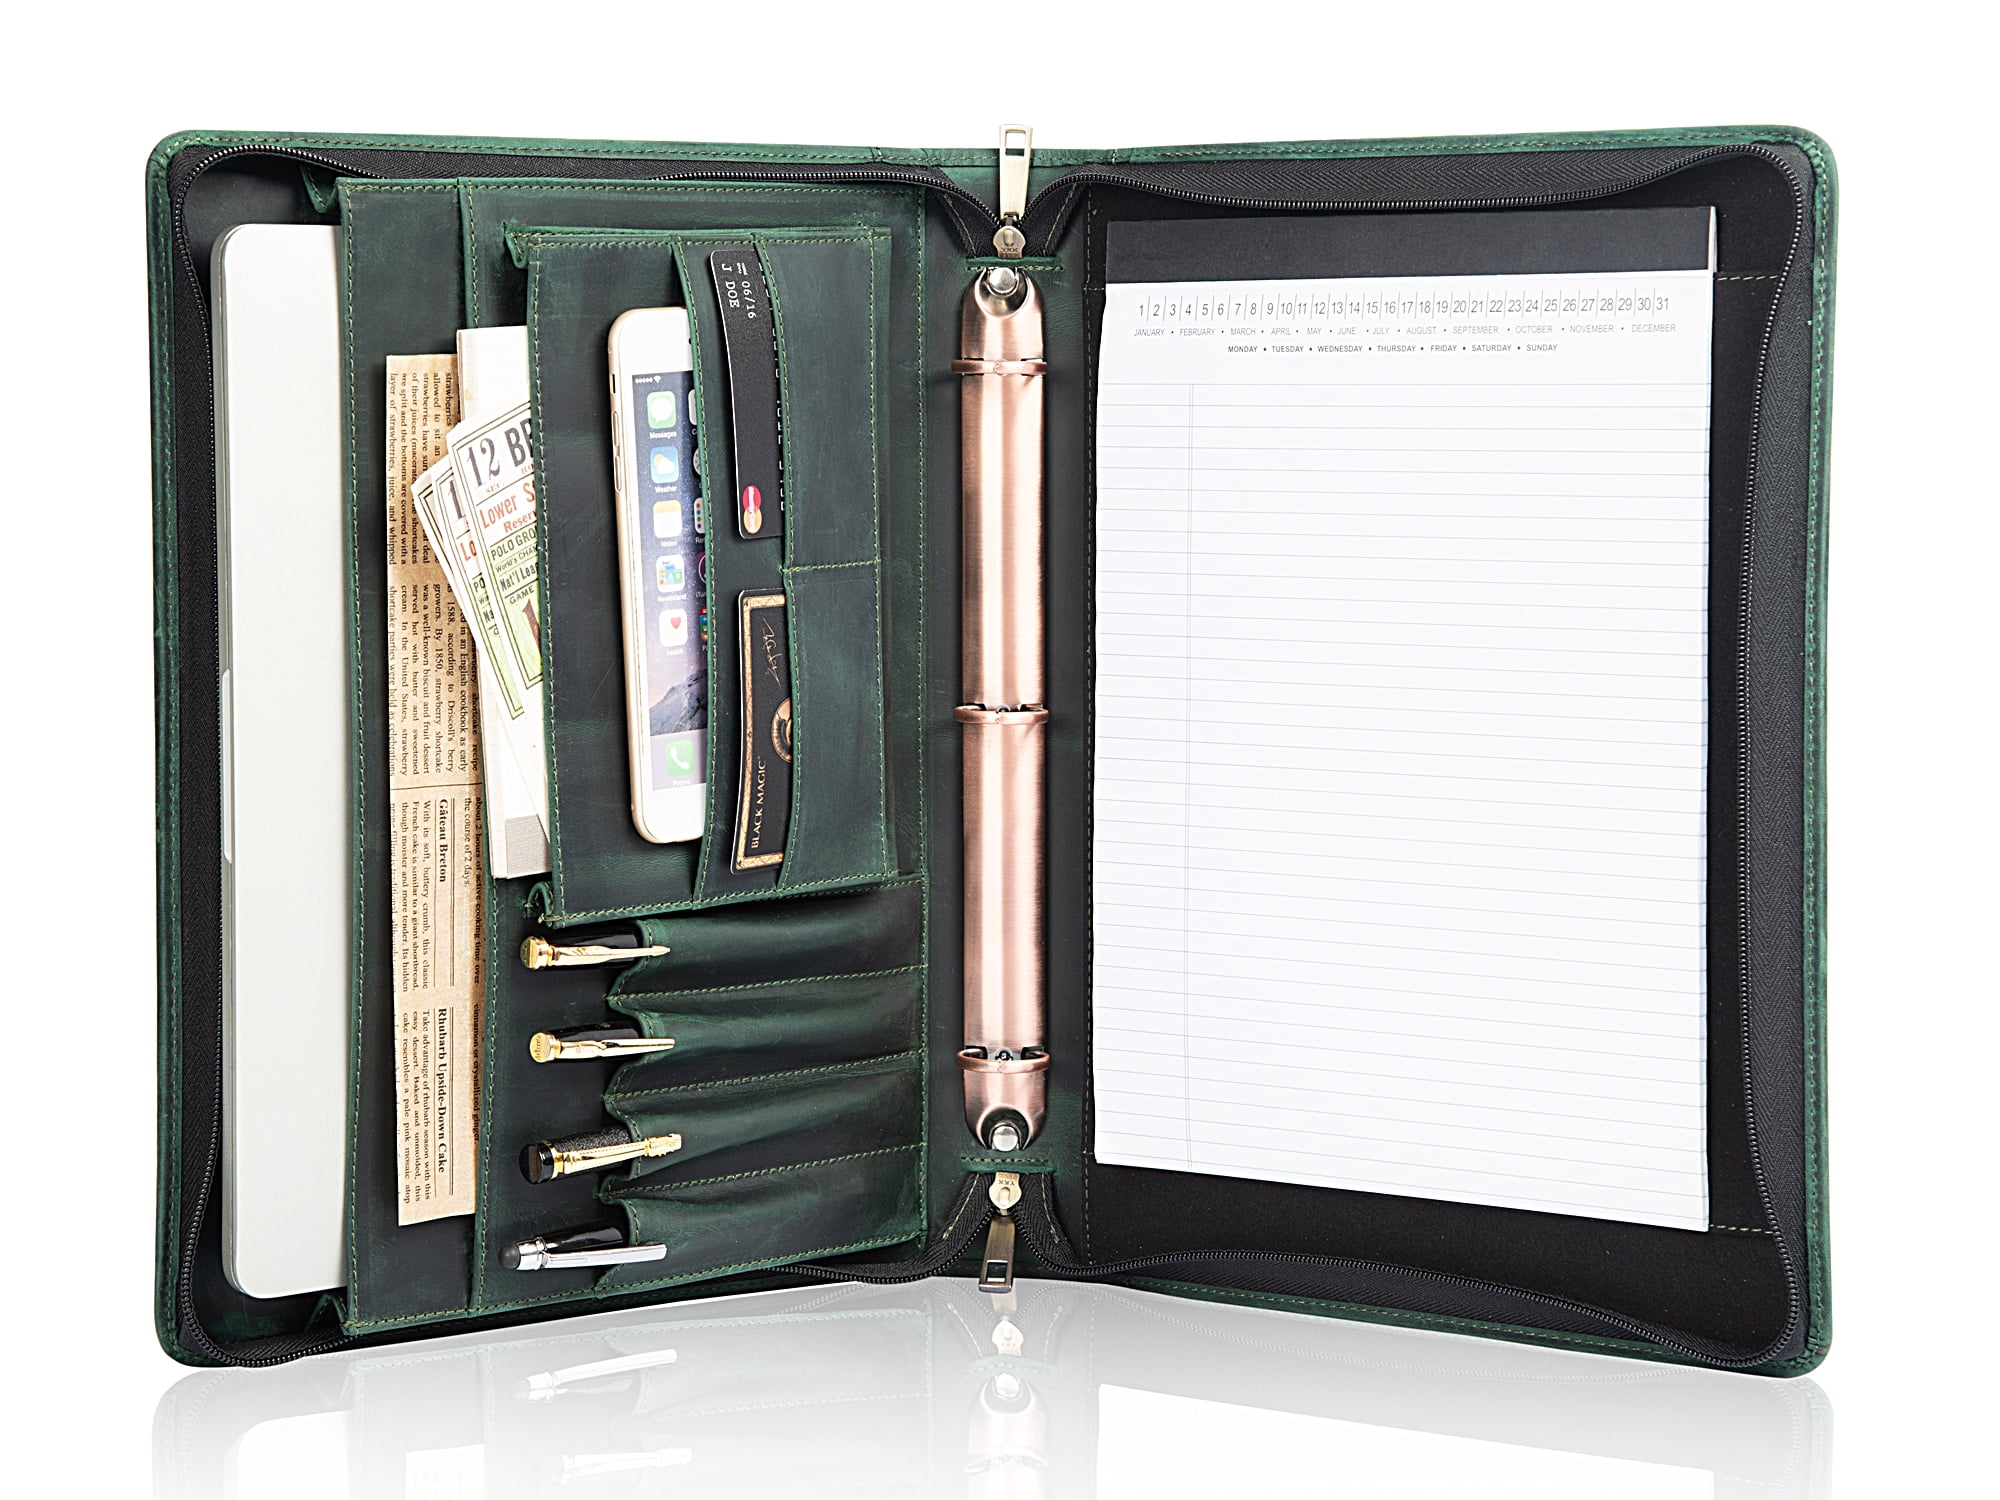 Allnice Zippered Portfolio 3 Ring Binder with 8 Pockes, Leather Business  Padfolio, A4 Document Binder Organizer for School Office